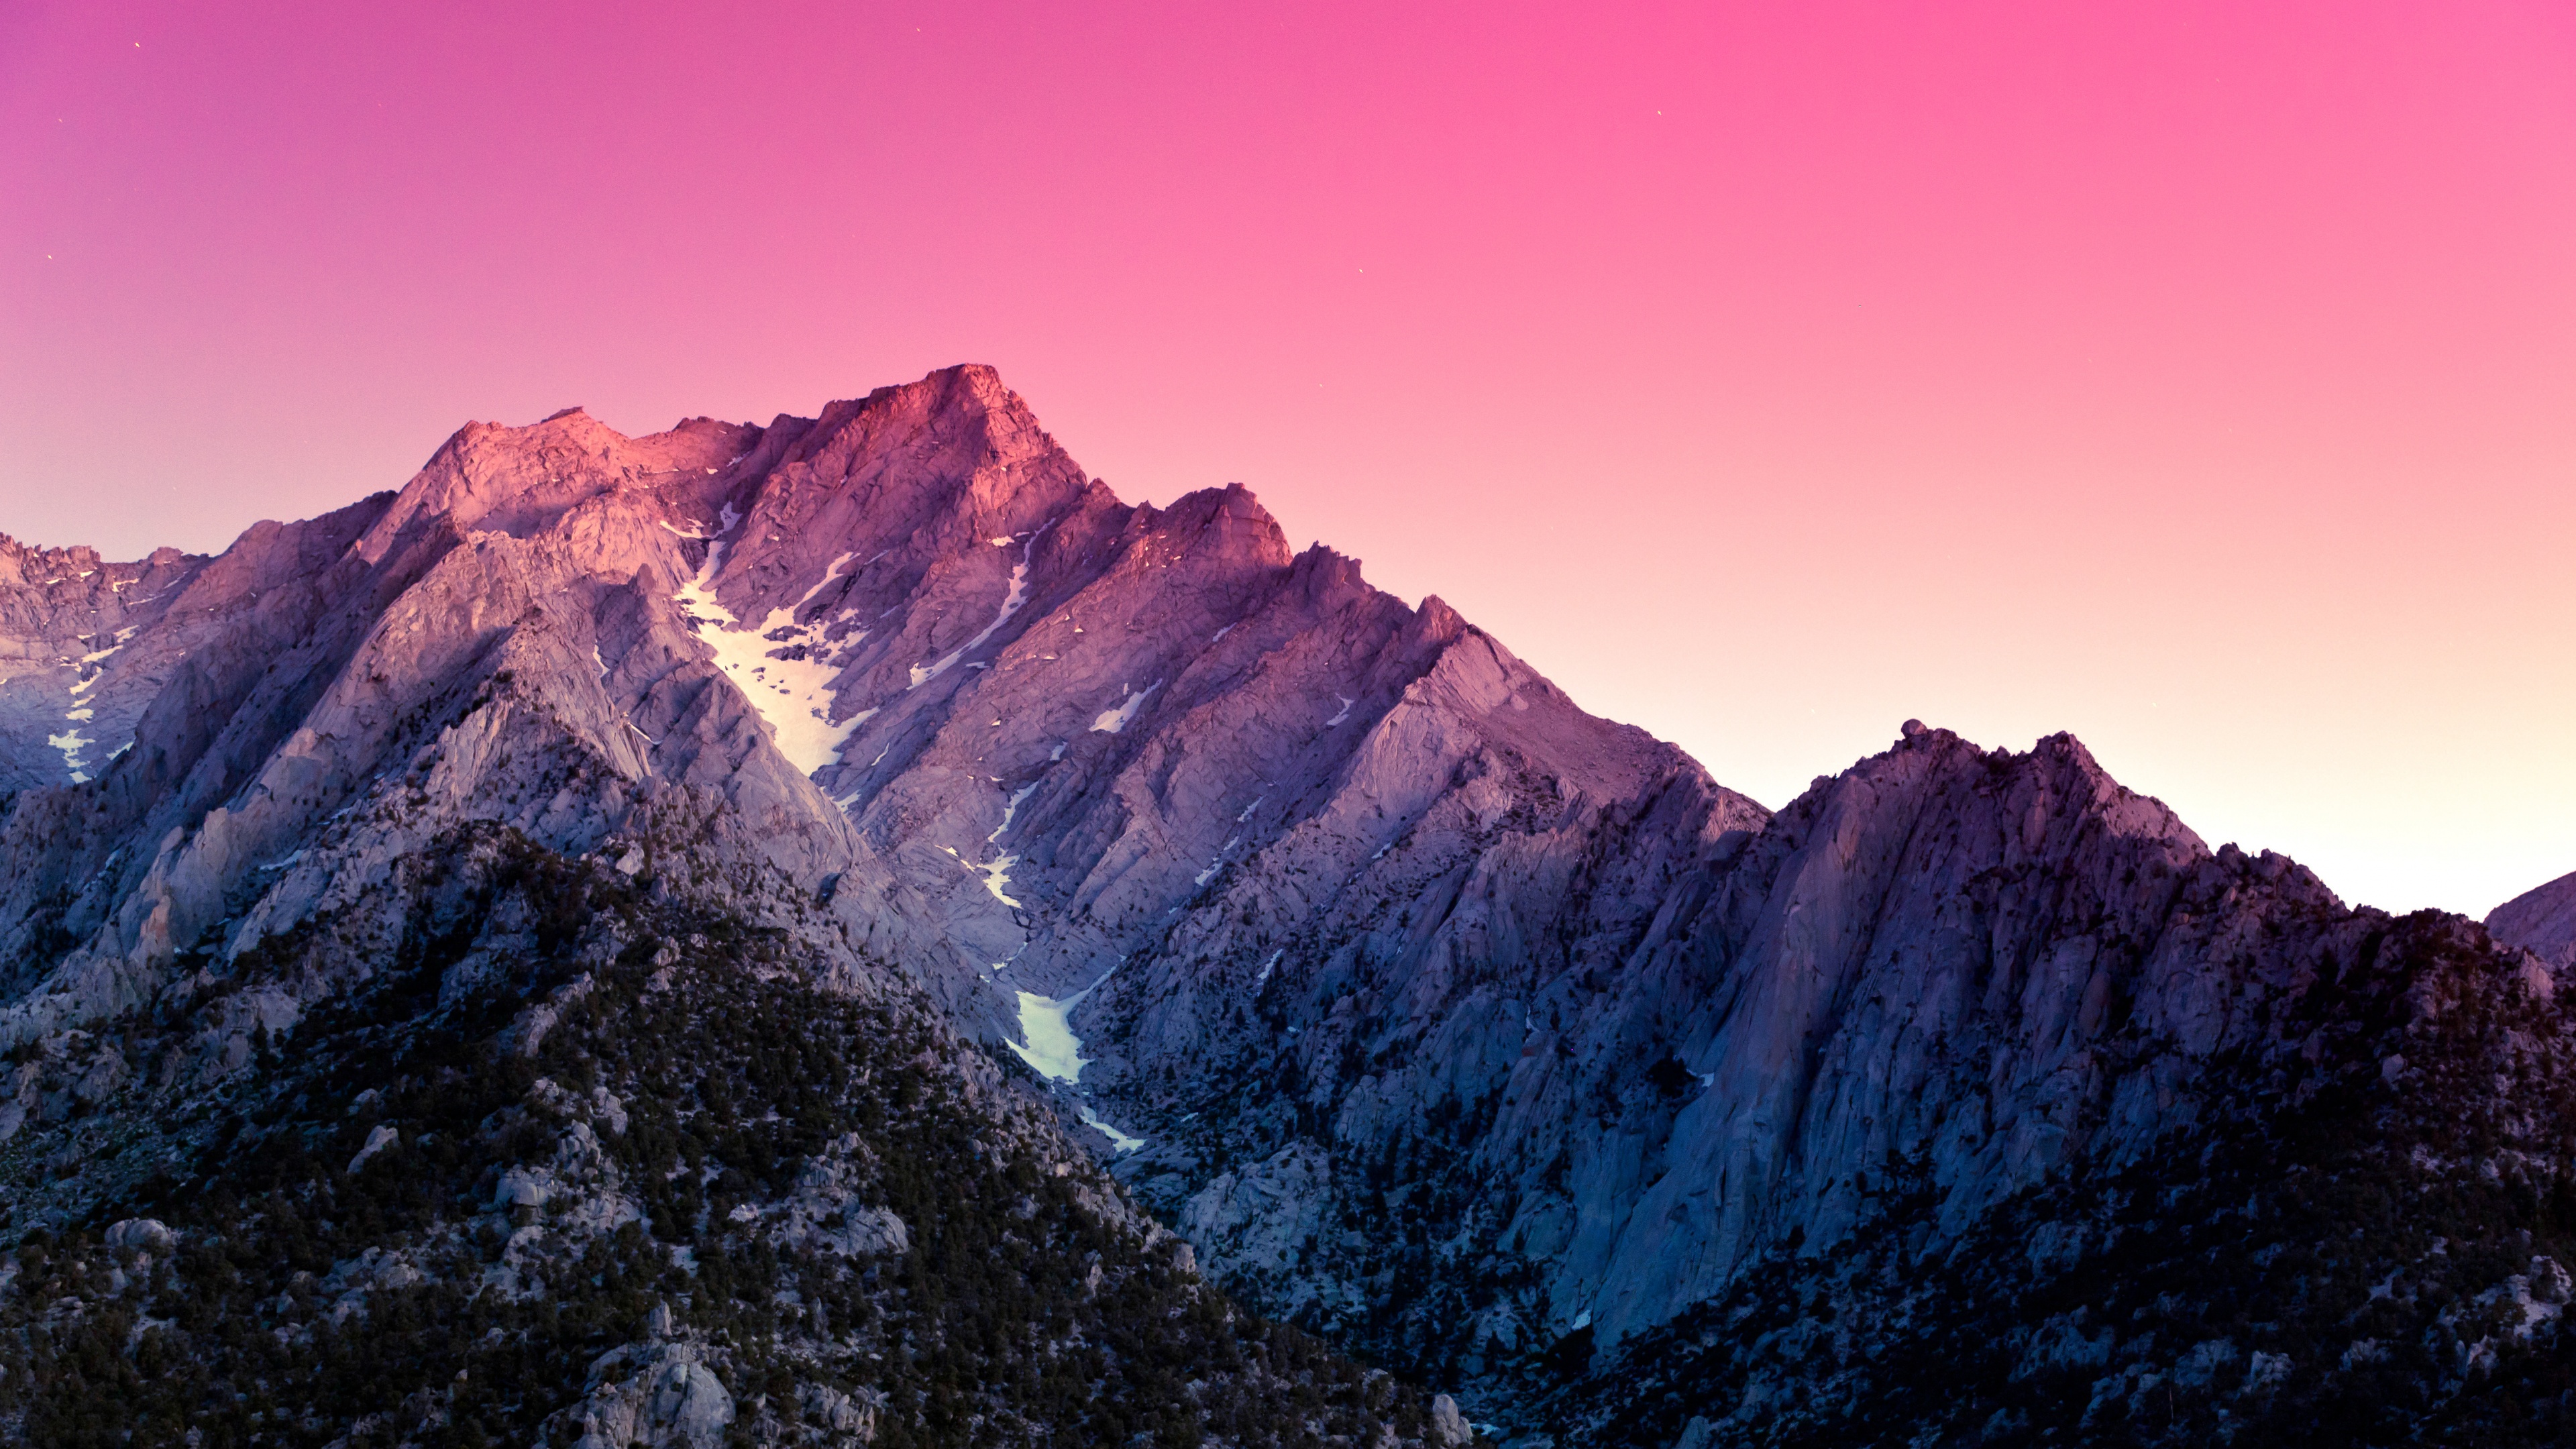 A mountain range with pink sky in the background - Rocks, California